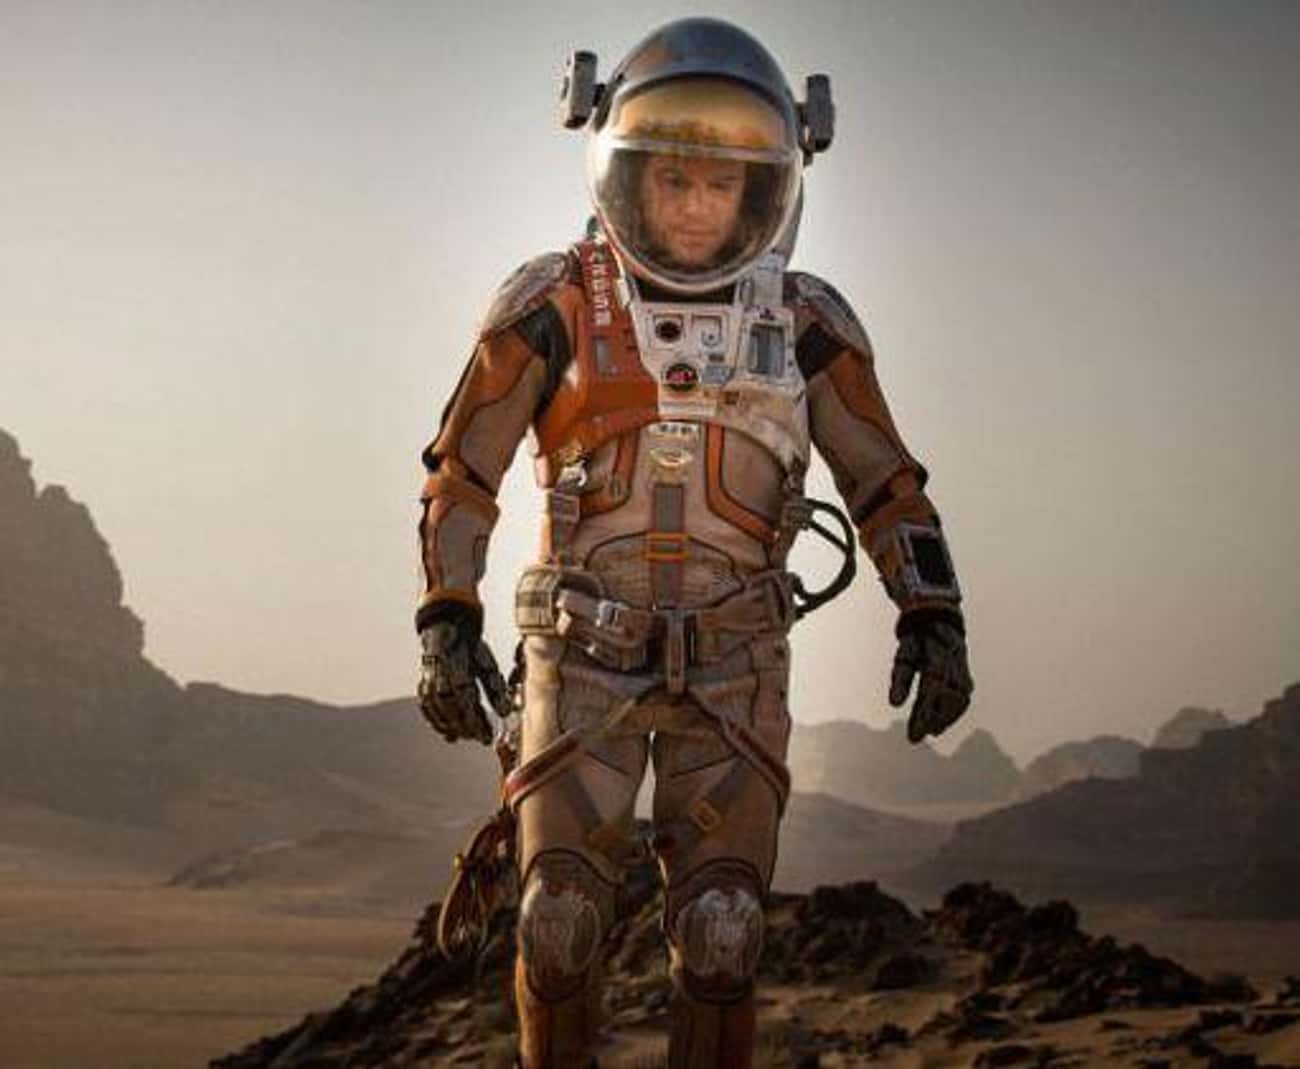 'The Martian' Wins For Best Musical/Comedy